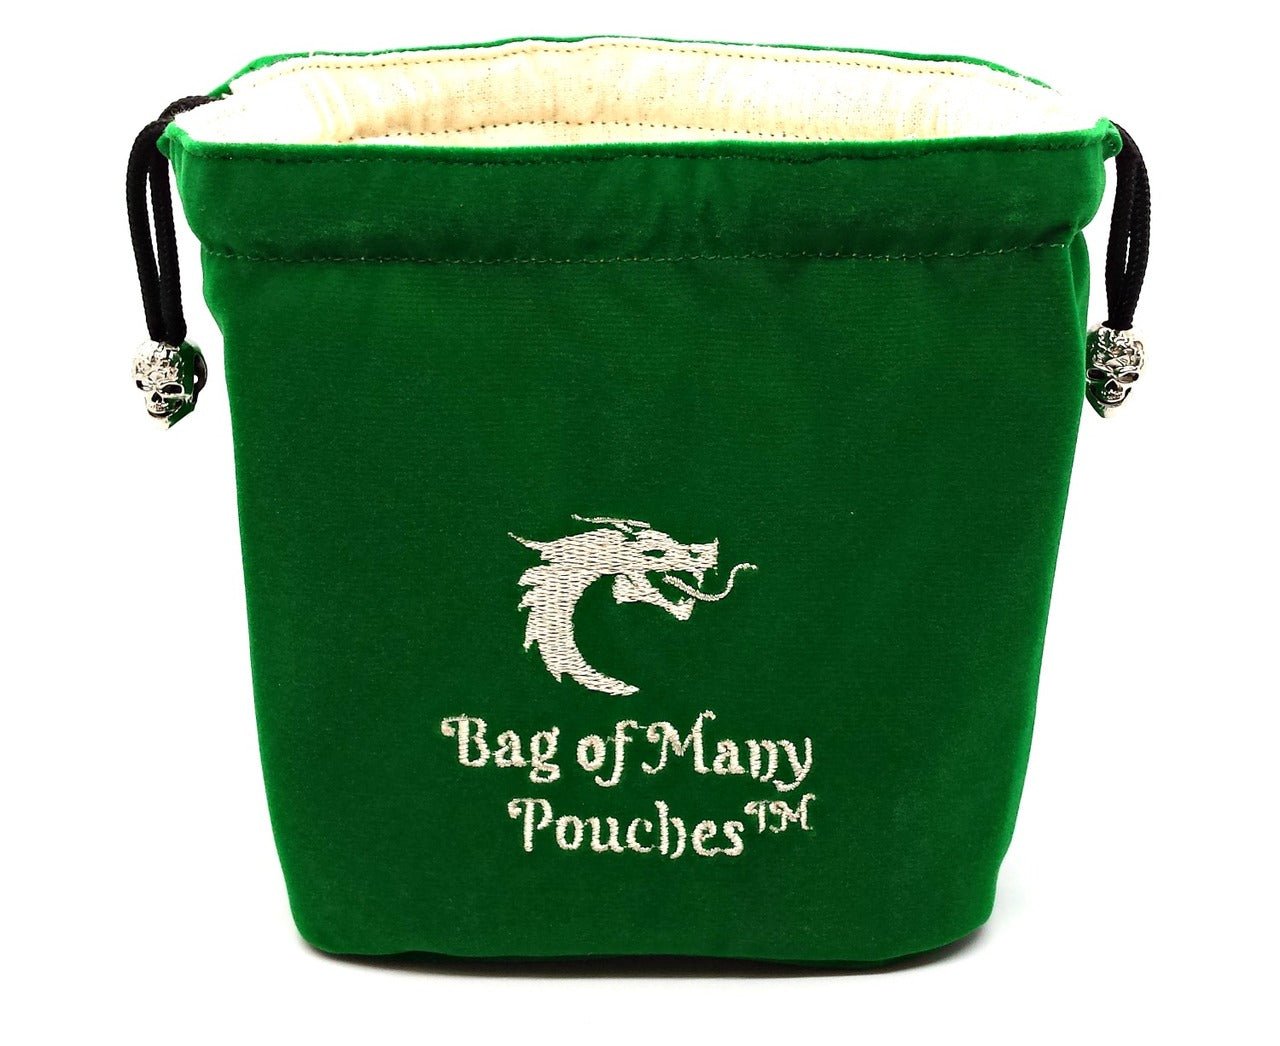 Old School Dice: Bag of Many Pouches - Green - Gamescape